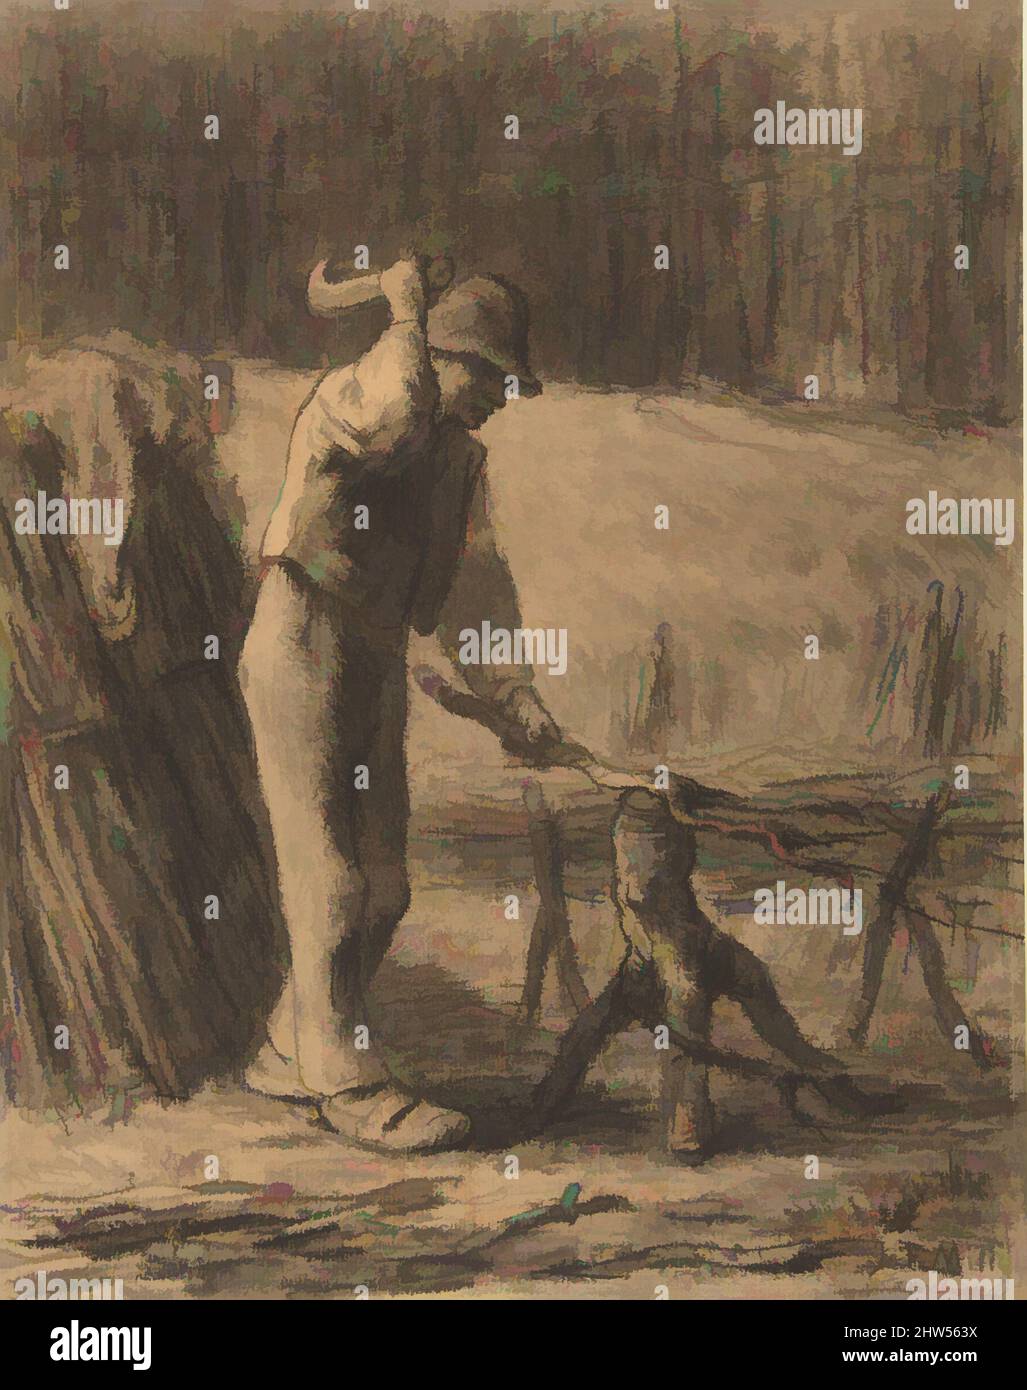 Art inspired by Woodcutter Trimming Faggots, 1853–54, Conté crayon with stumping on beige laid paper, Overall: 15 x 11 3/4in. (38.1 x 29.8cm), Drawings, Jean-François Millet (French, Gruchy 1814–1875 Barbizon, Classic works modernized by Artotop with a splash of modernity. Shapes, color and value, eye-catching visual impact on art. Emotions through freedom of artworks in a contemporary way. A timeless message pursuing a wildly creative new direction. Artists turning to the digital medium and creating the Artotop NFT Stock Photo